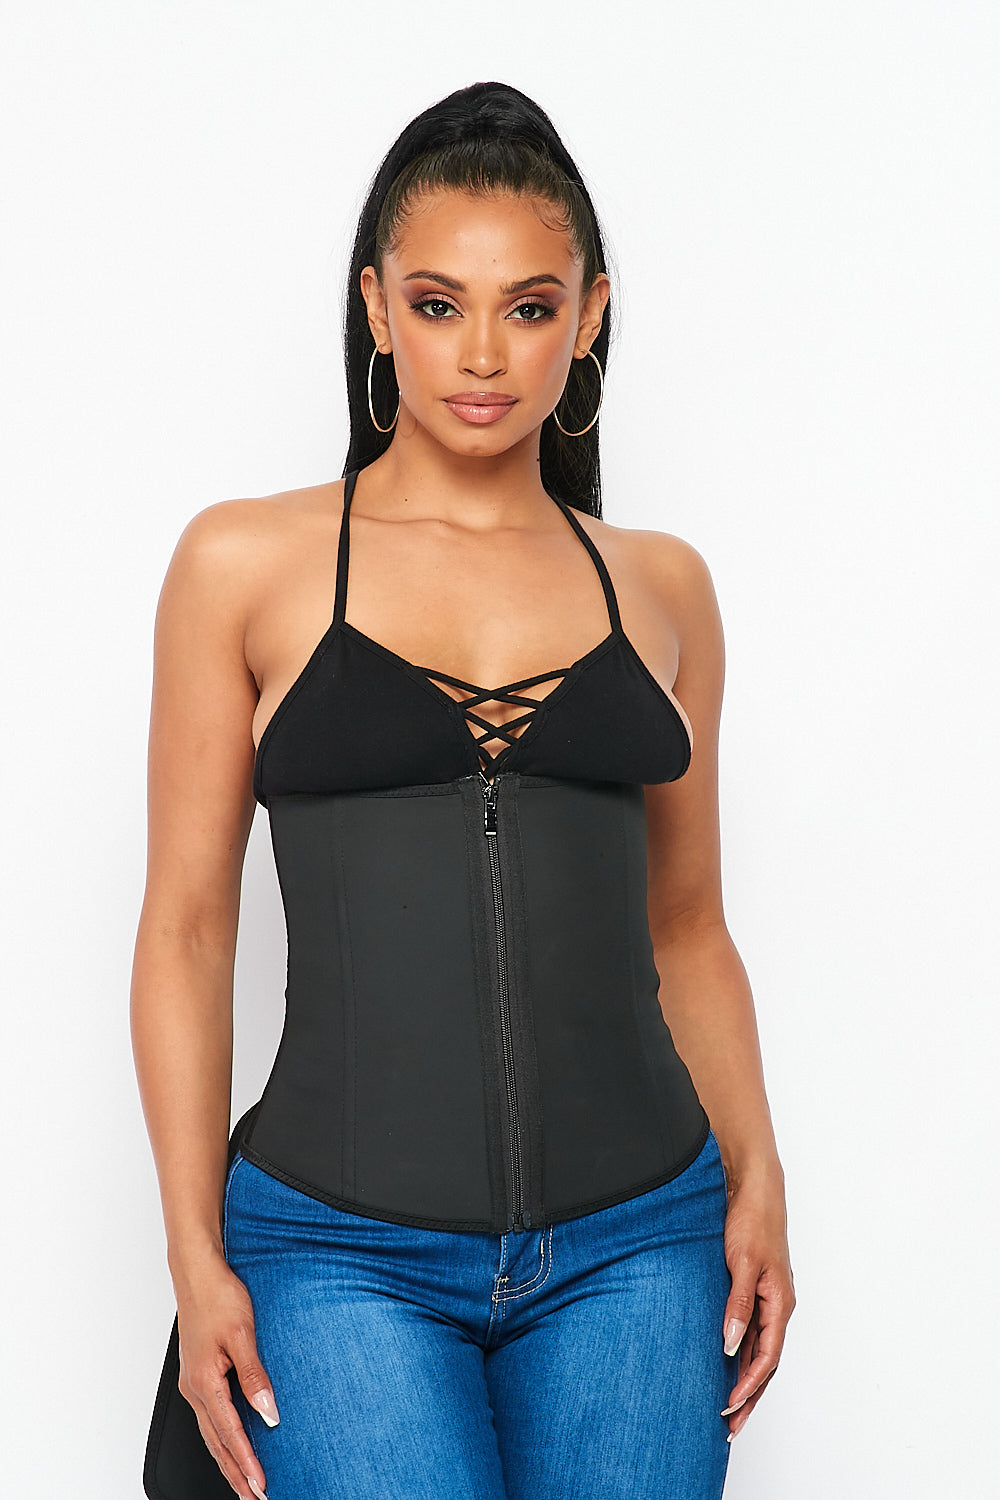 Double Compression Latex Waist Trainer